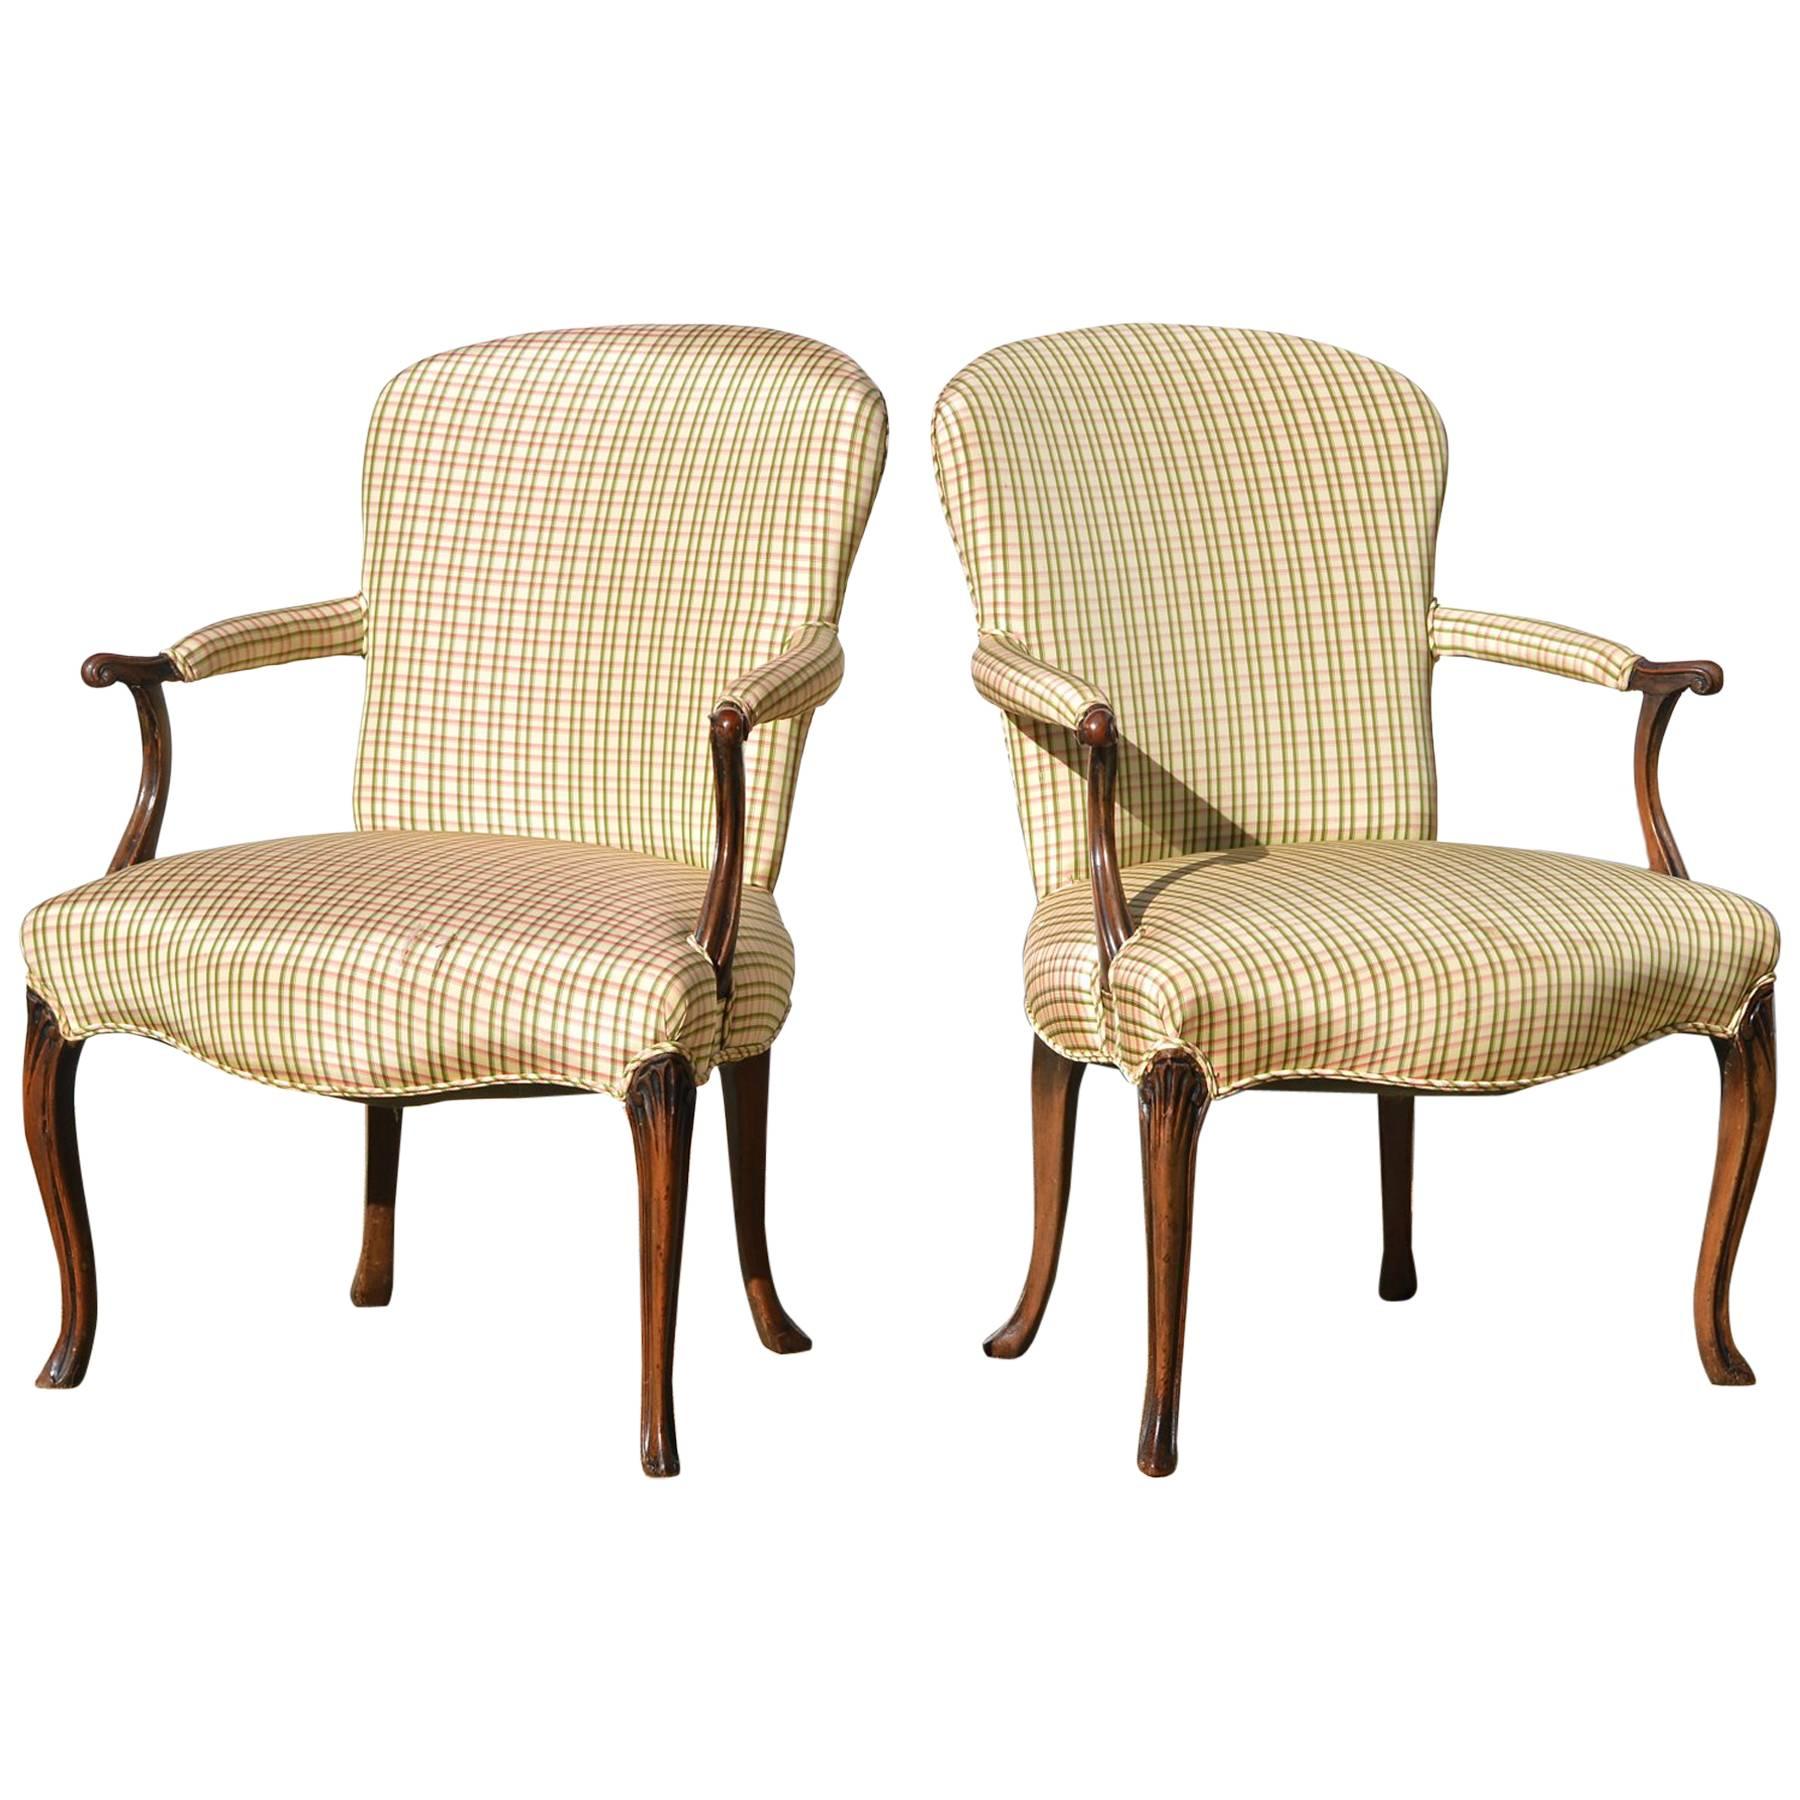 Georgian Library Chairs of Fruitwood, Pair